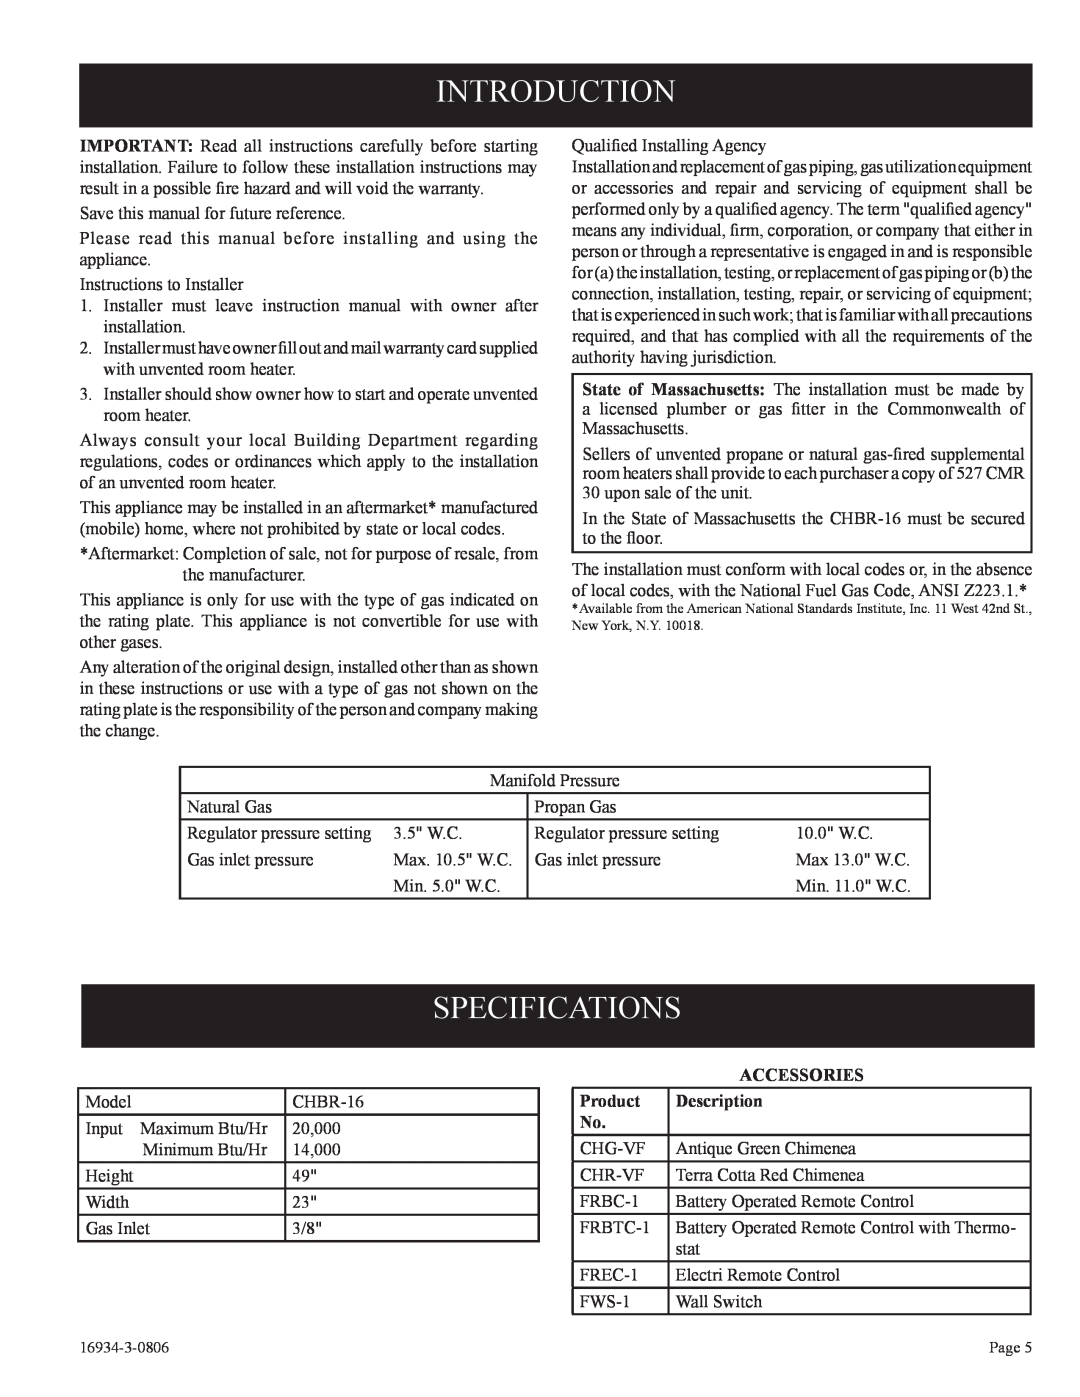 Empire Comfort Systems CHBR-16-3 installation instructions Introduction, Specifications, Accessories, Product, Description 